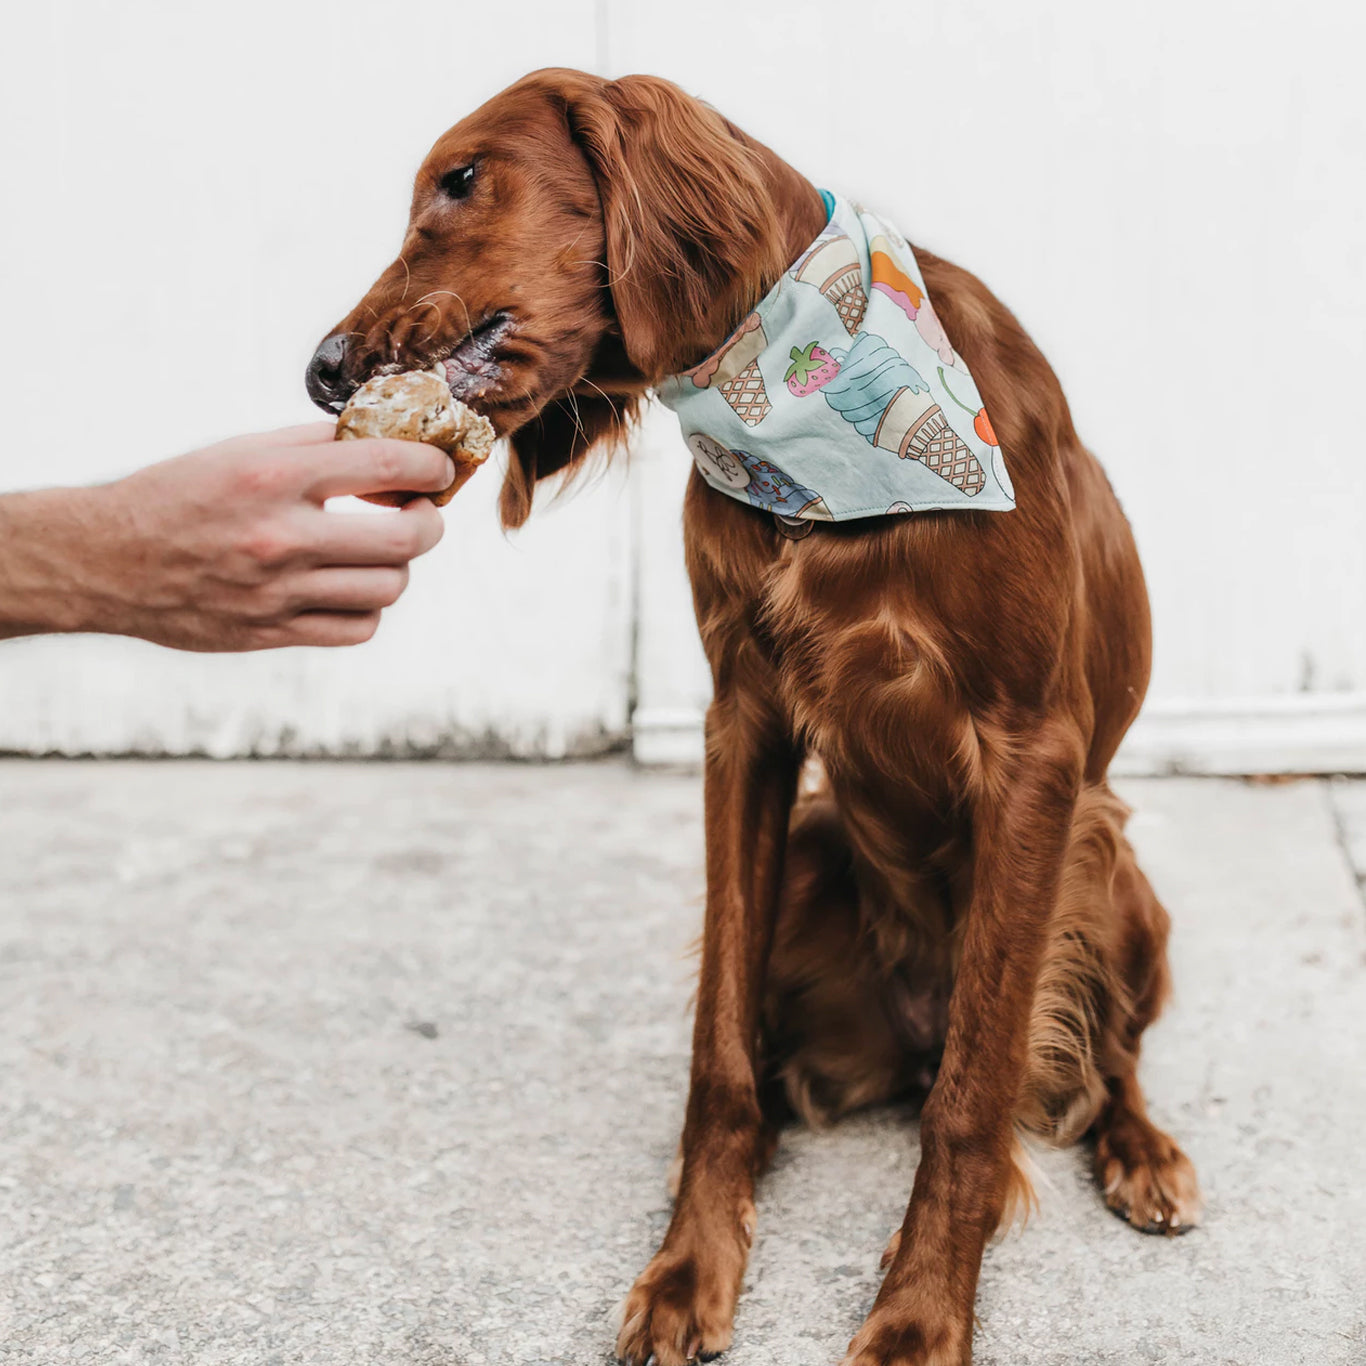 Give Your Dog A Treat Made With Love